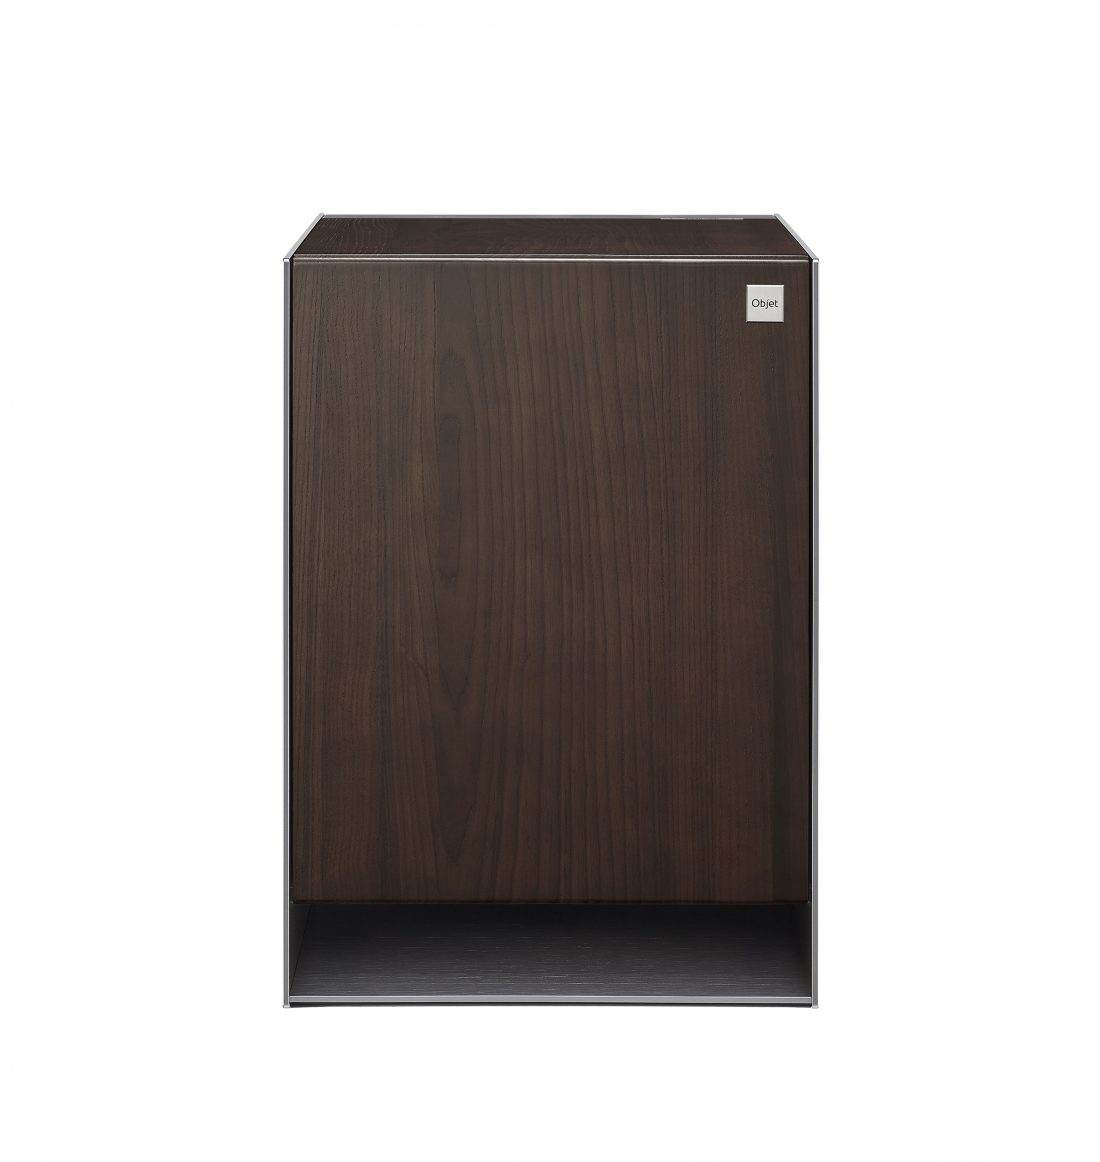 Front view of LG OBJET Refrigerator